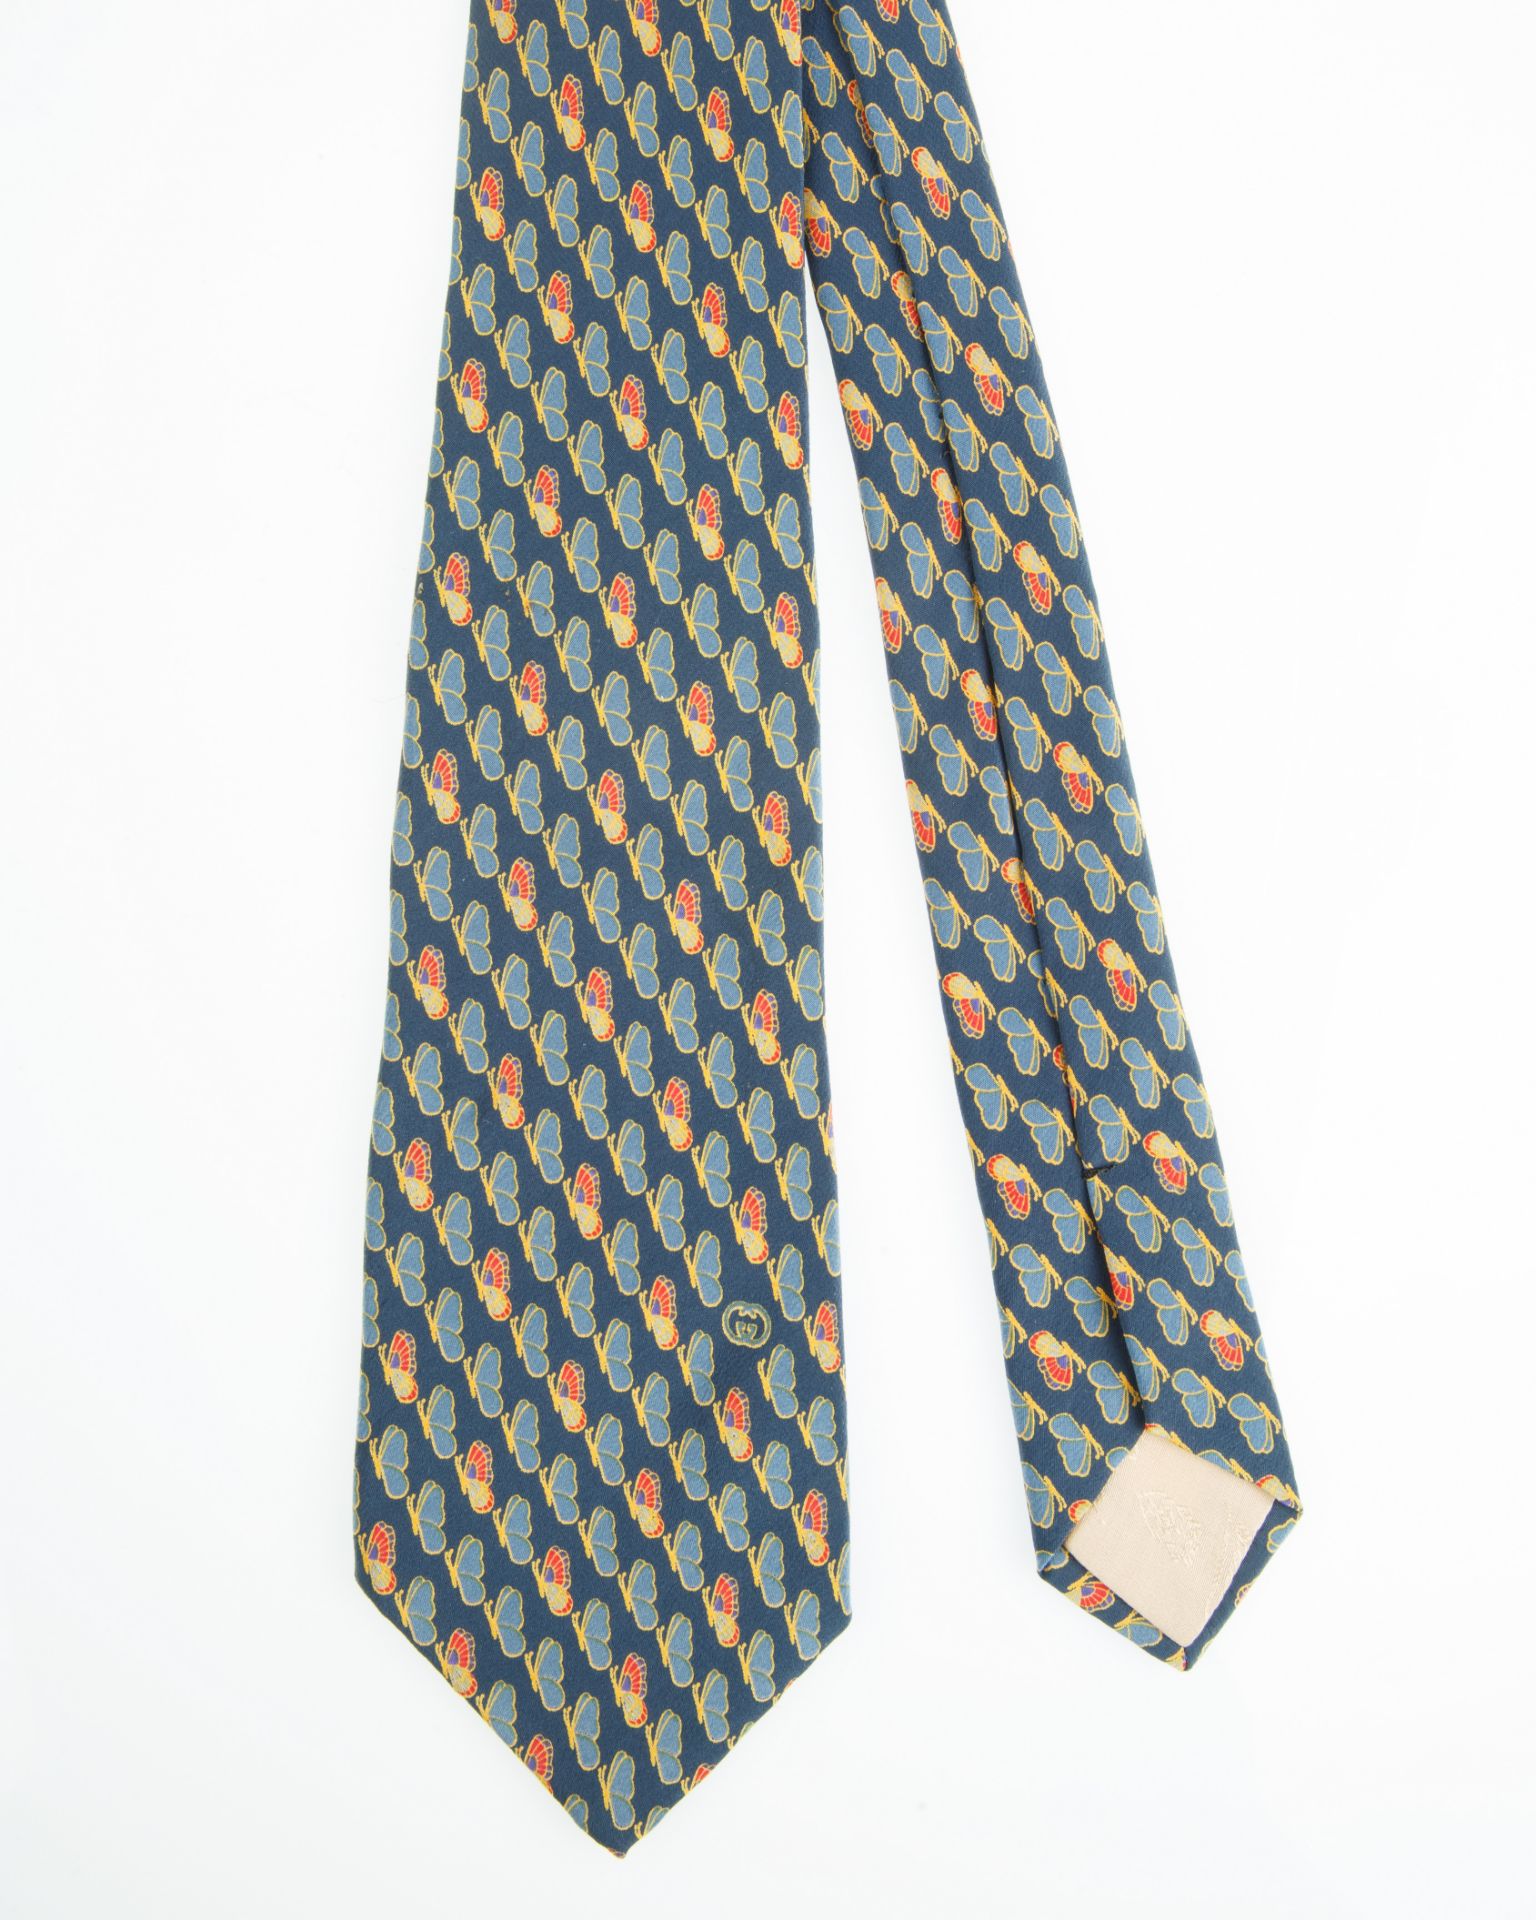 GROUP OF SEVEN GUCCI TIES - Image 4 of 15